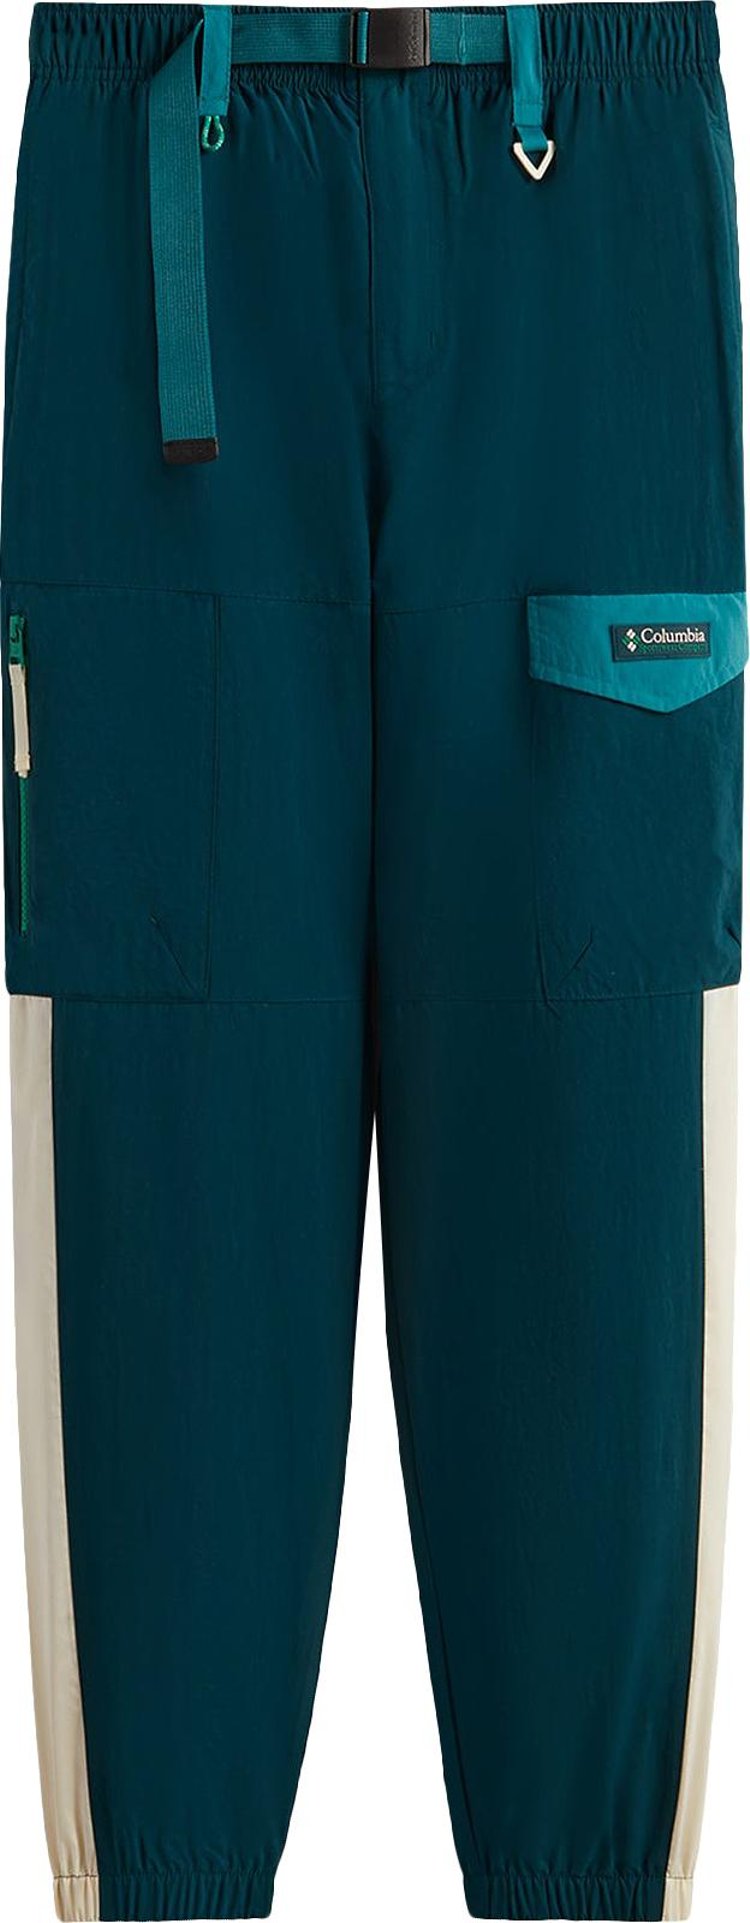 Kith For Columbia Wind Pant 'Midnight Teal'